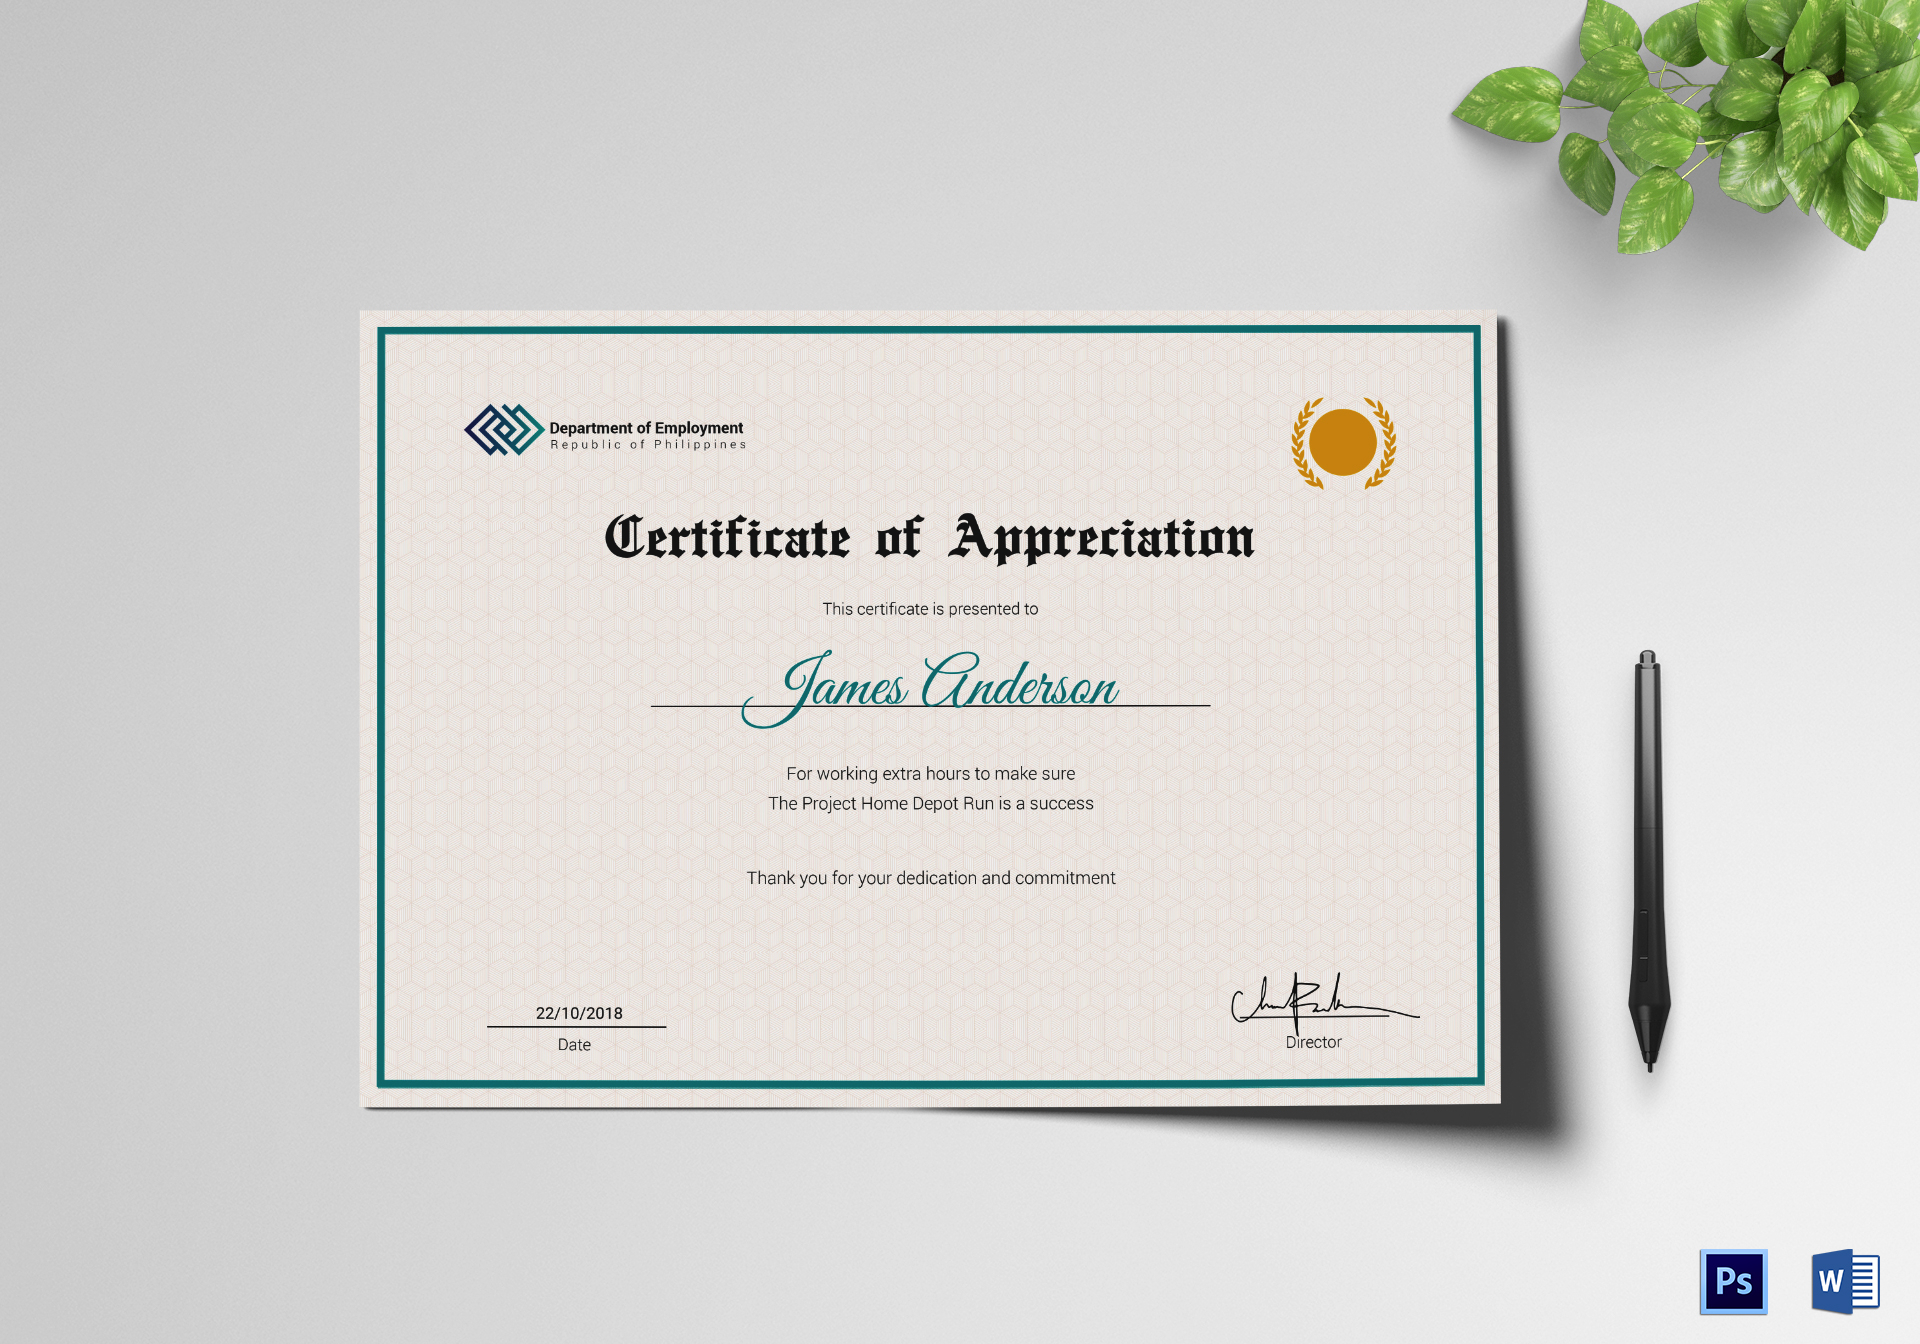 Employee Service Certificate Template For Certificate For Years Of Service Template